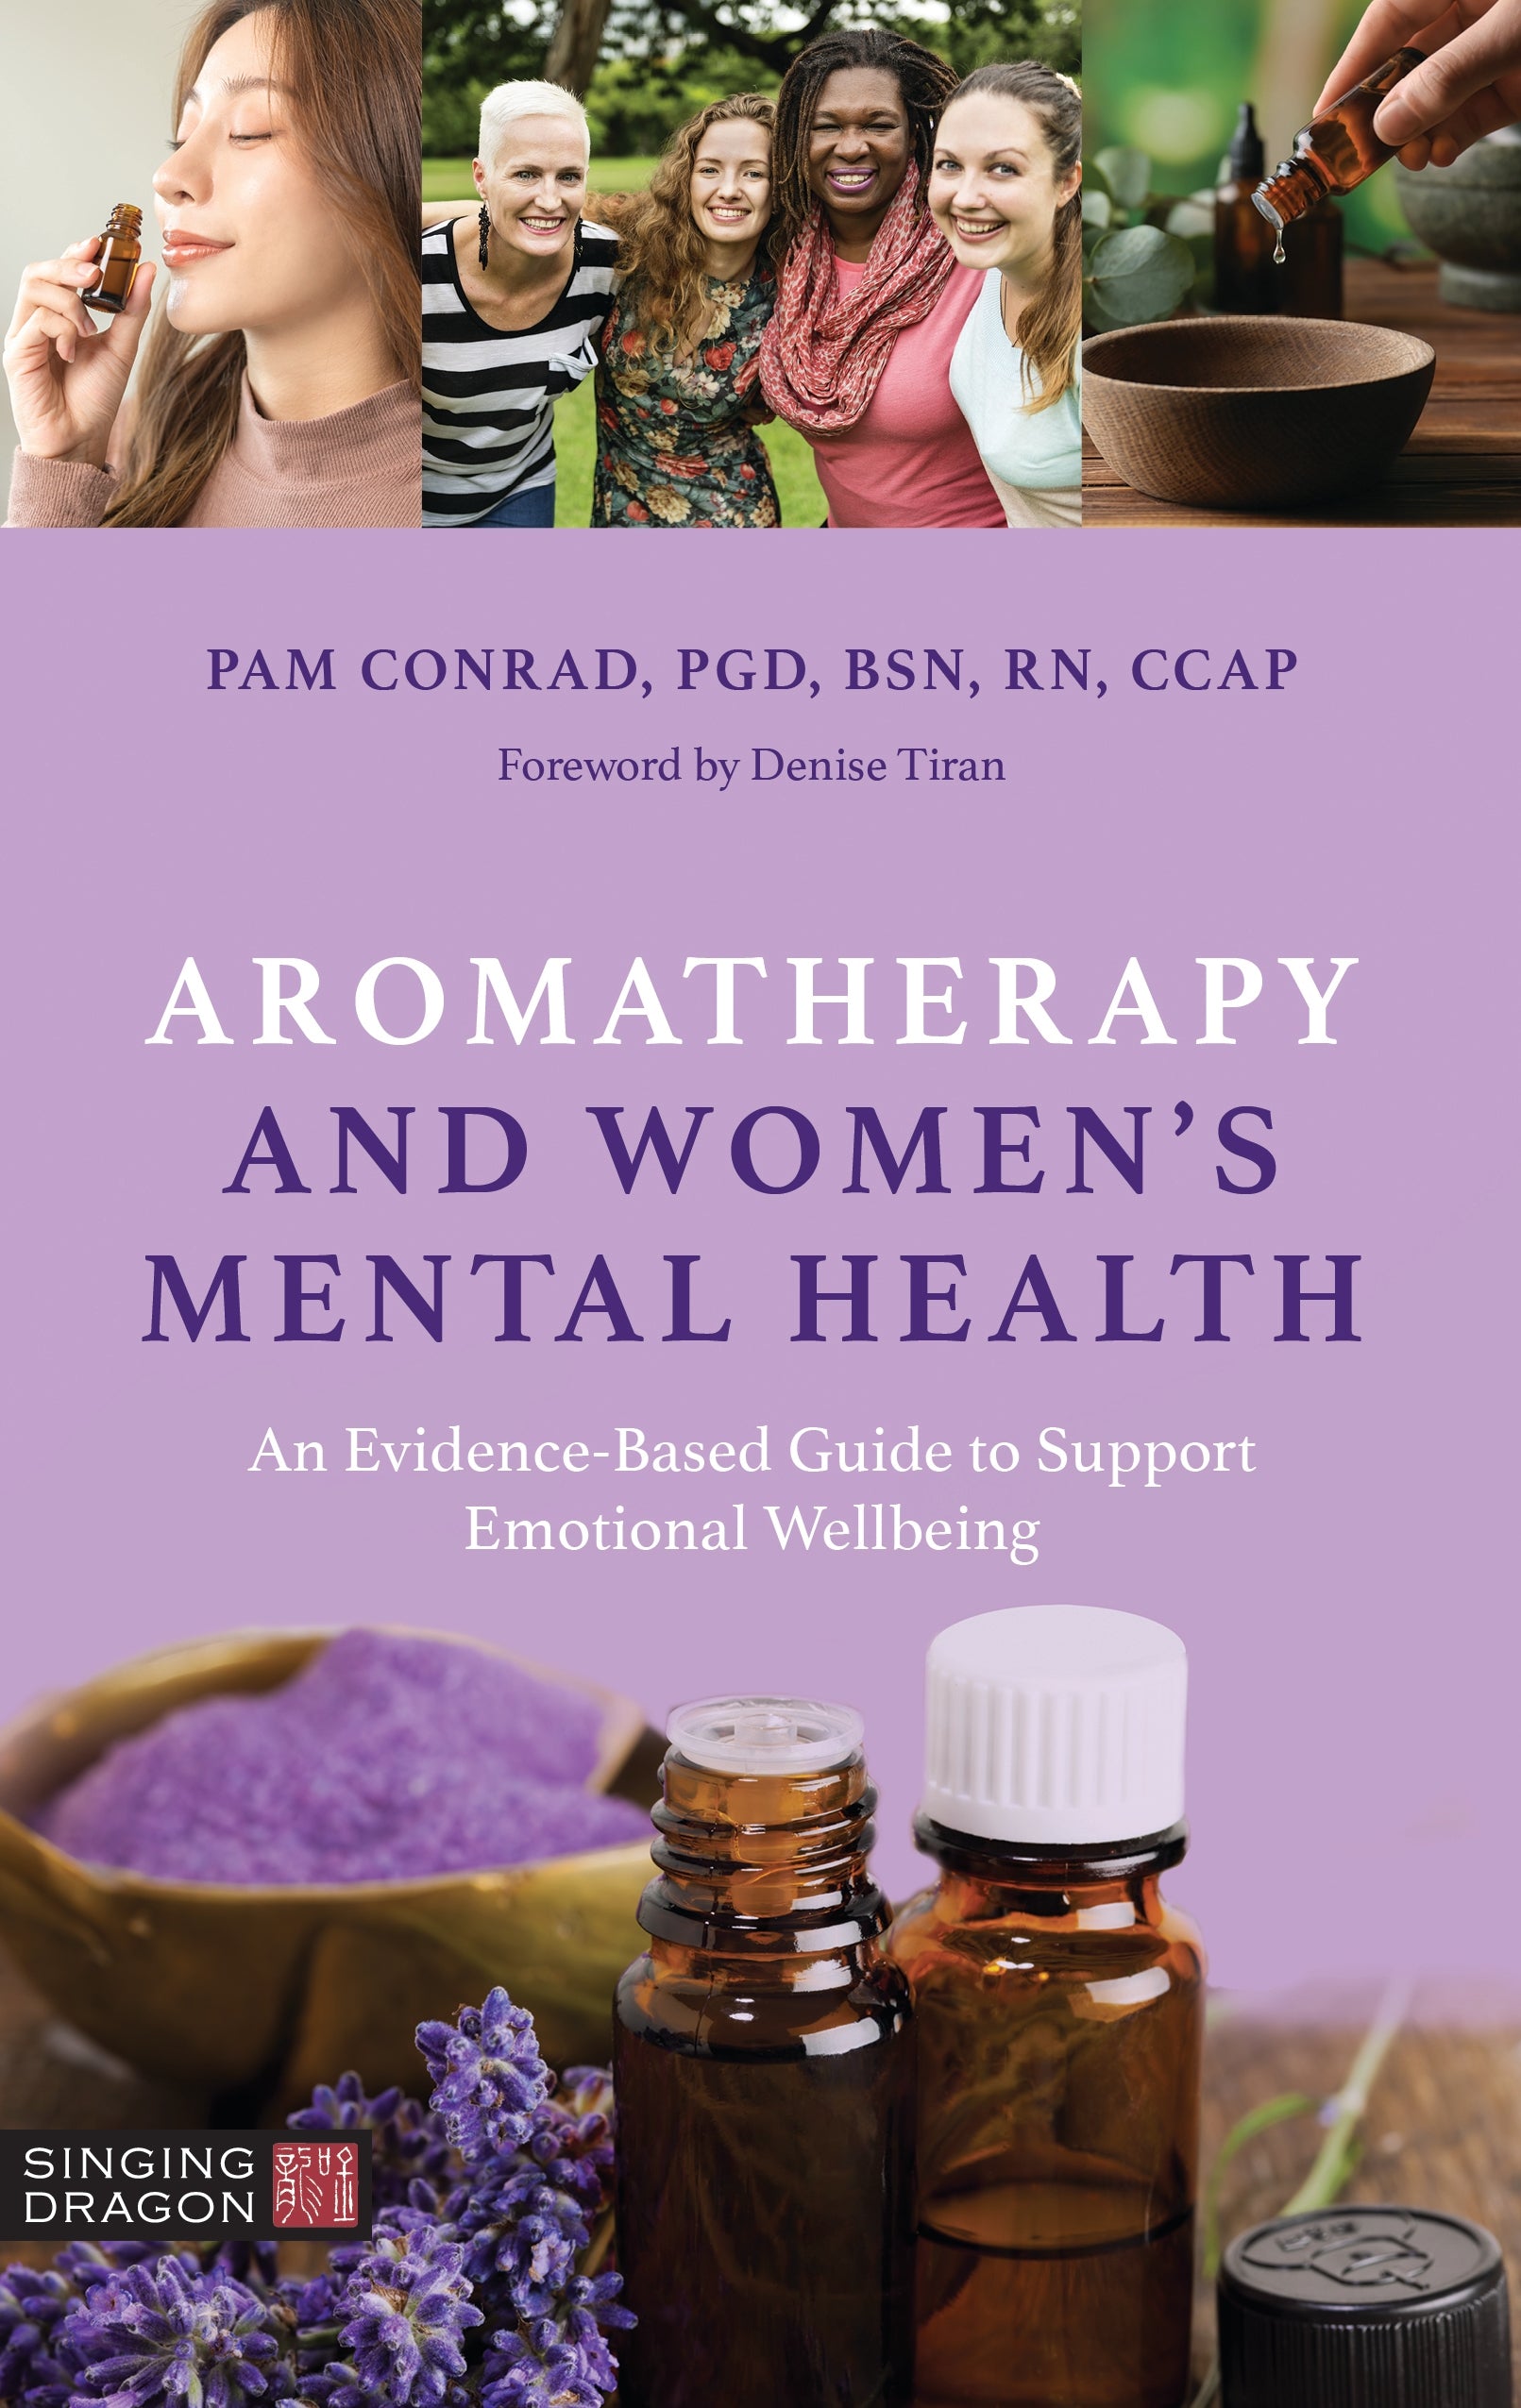 Aromatherapy and Women’s Mental Health by Denise Tiran, Pam Conrad